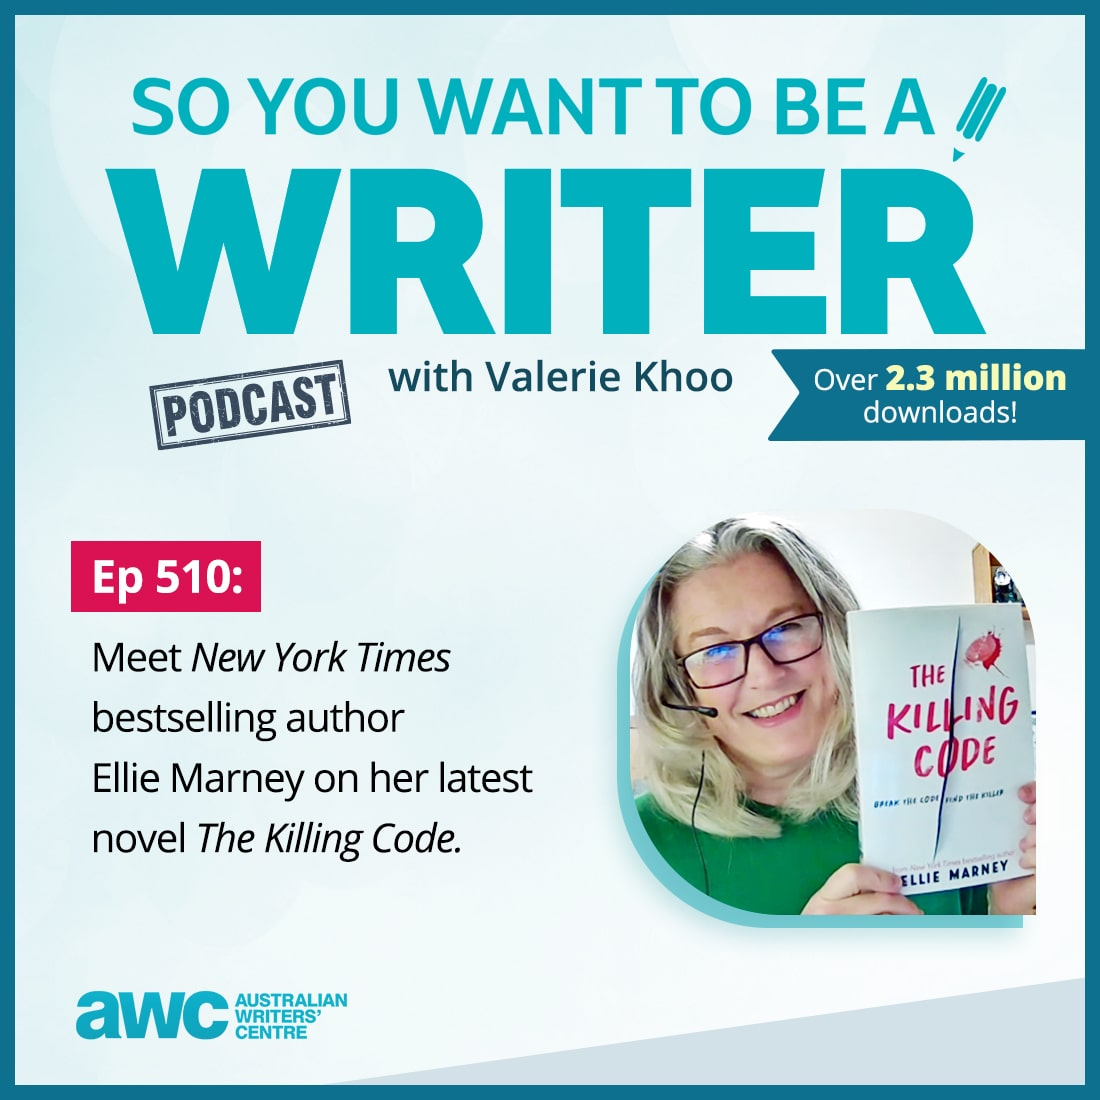 WRITER 510: Meet New York Times bestselling author Ellie Marney on her latest novel The Killing Code